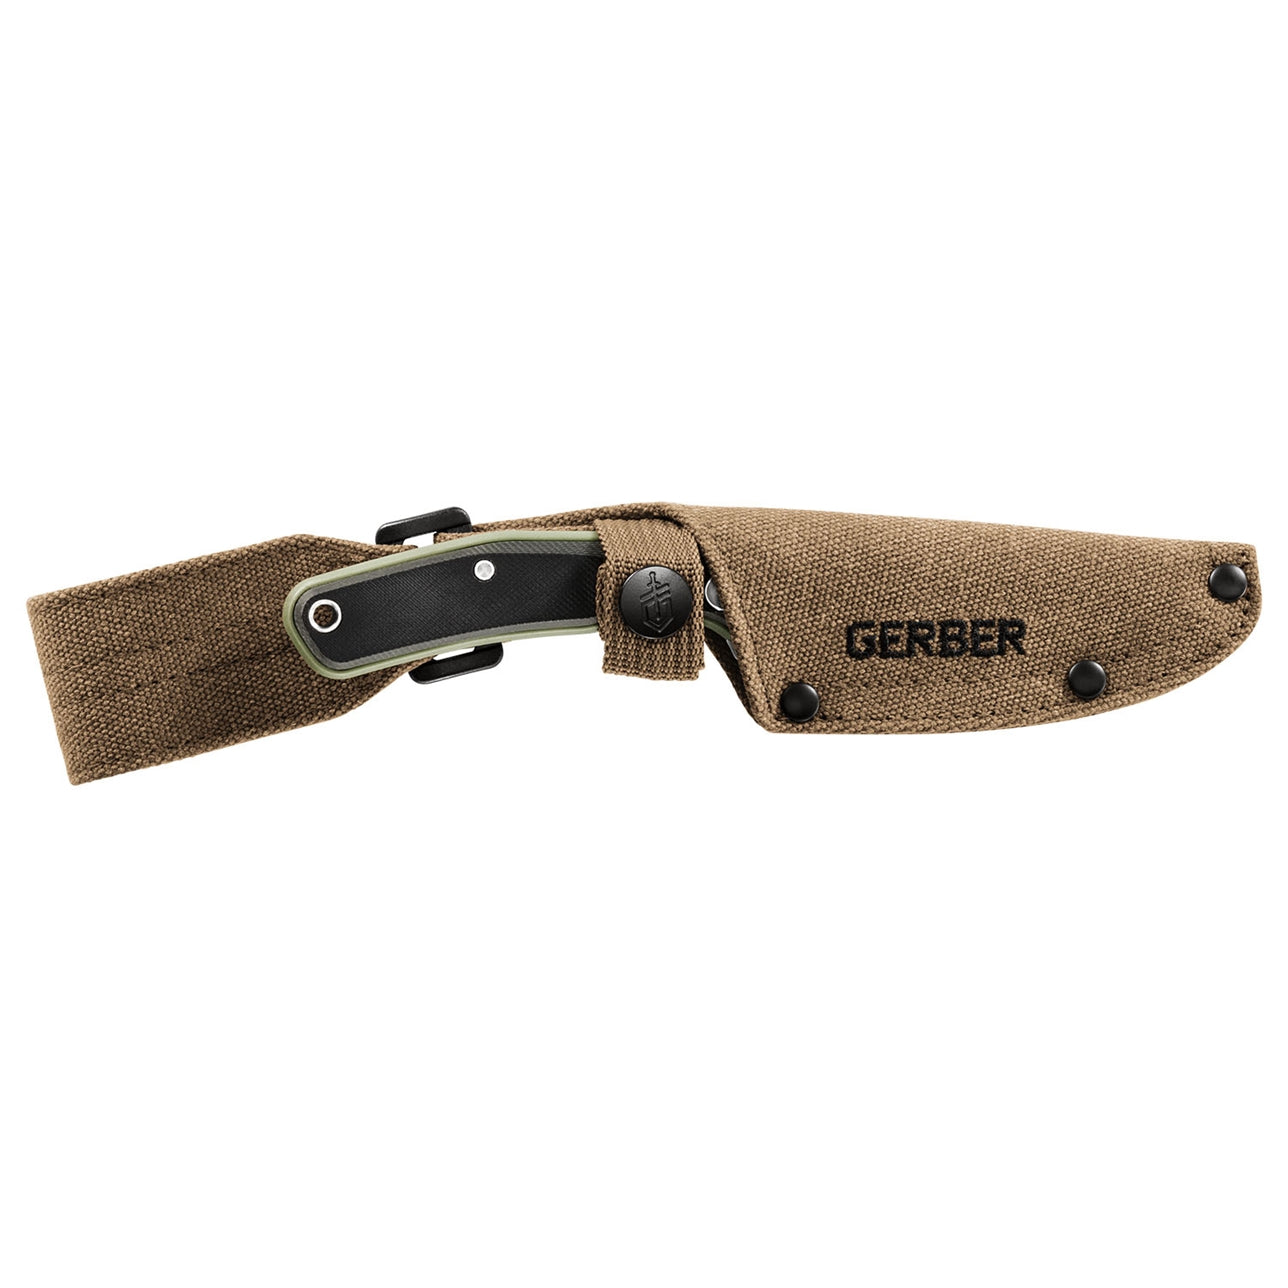 gerber downwind fixed blade knife for sale in houston texas at hawkes outdoors 2102512882